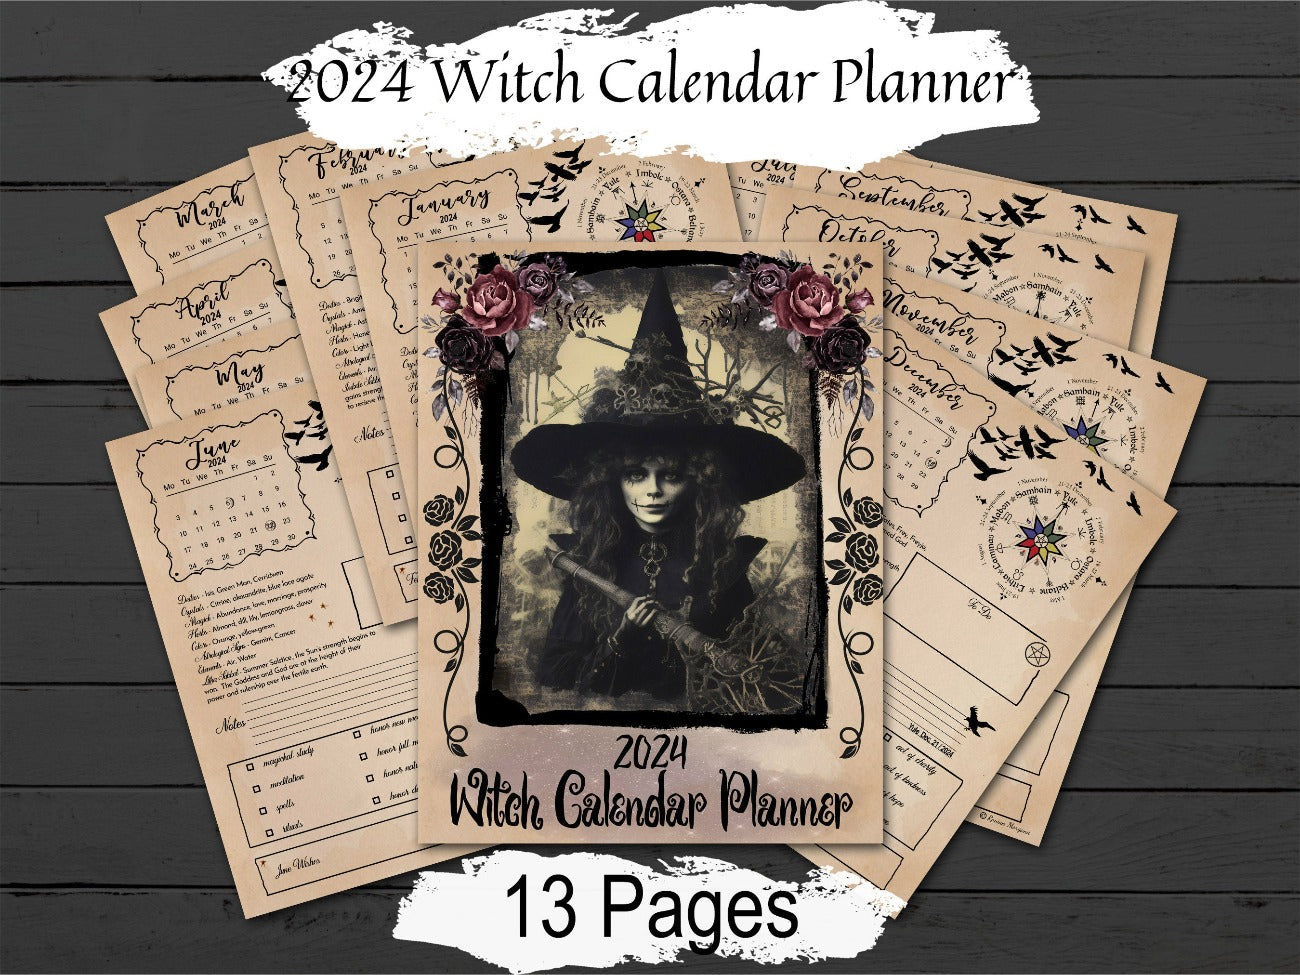 2024 CALENDAR WITCH PLANNER 13 Pages, Witchcraft Wheel of the Year, 12 Month Wicca Planner, Witch Journal 2024, Sabbat, Esbat, Pagan Holiday - Morgana Magick Spell